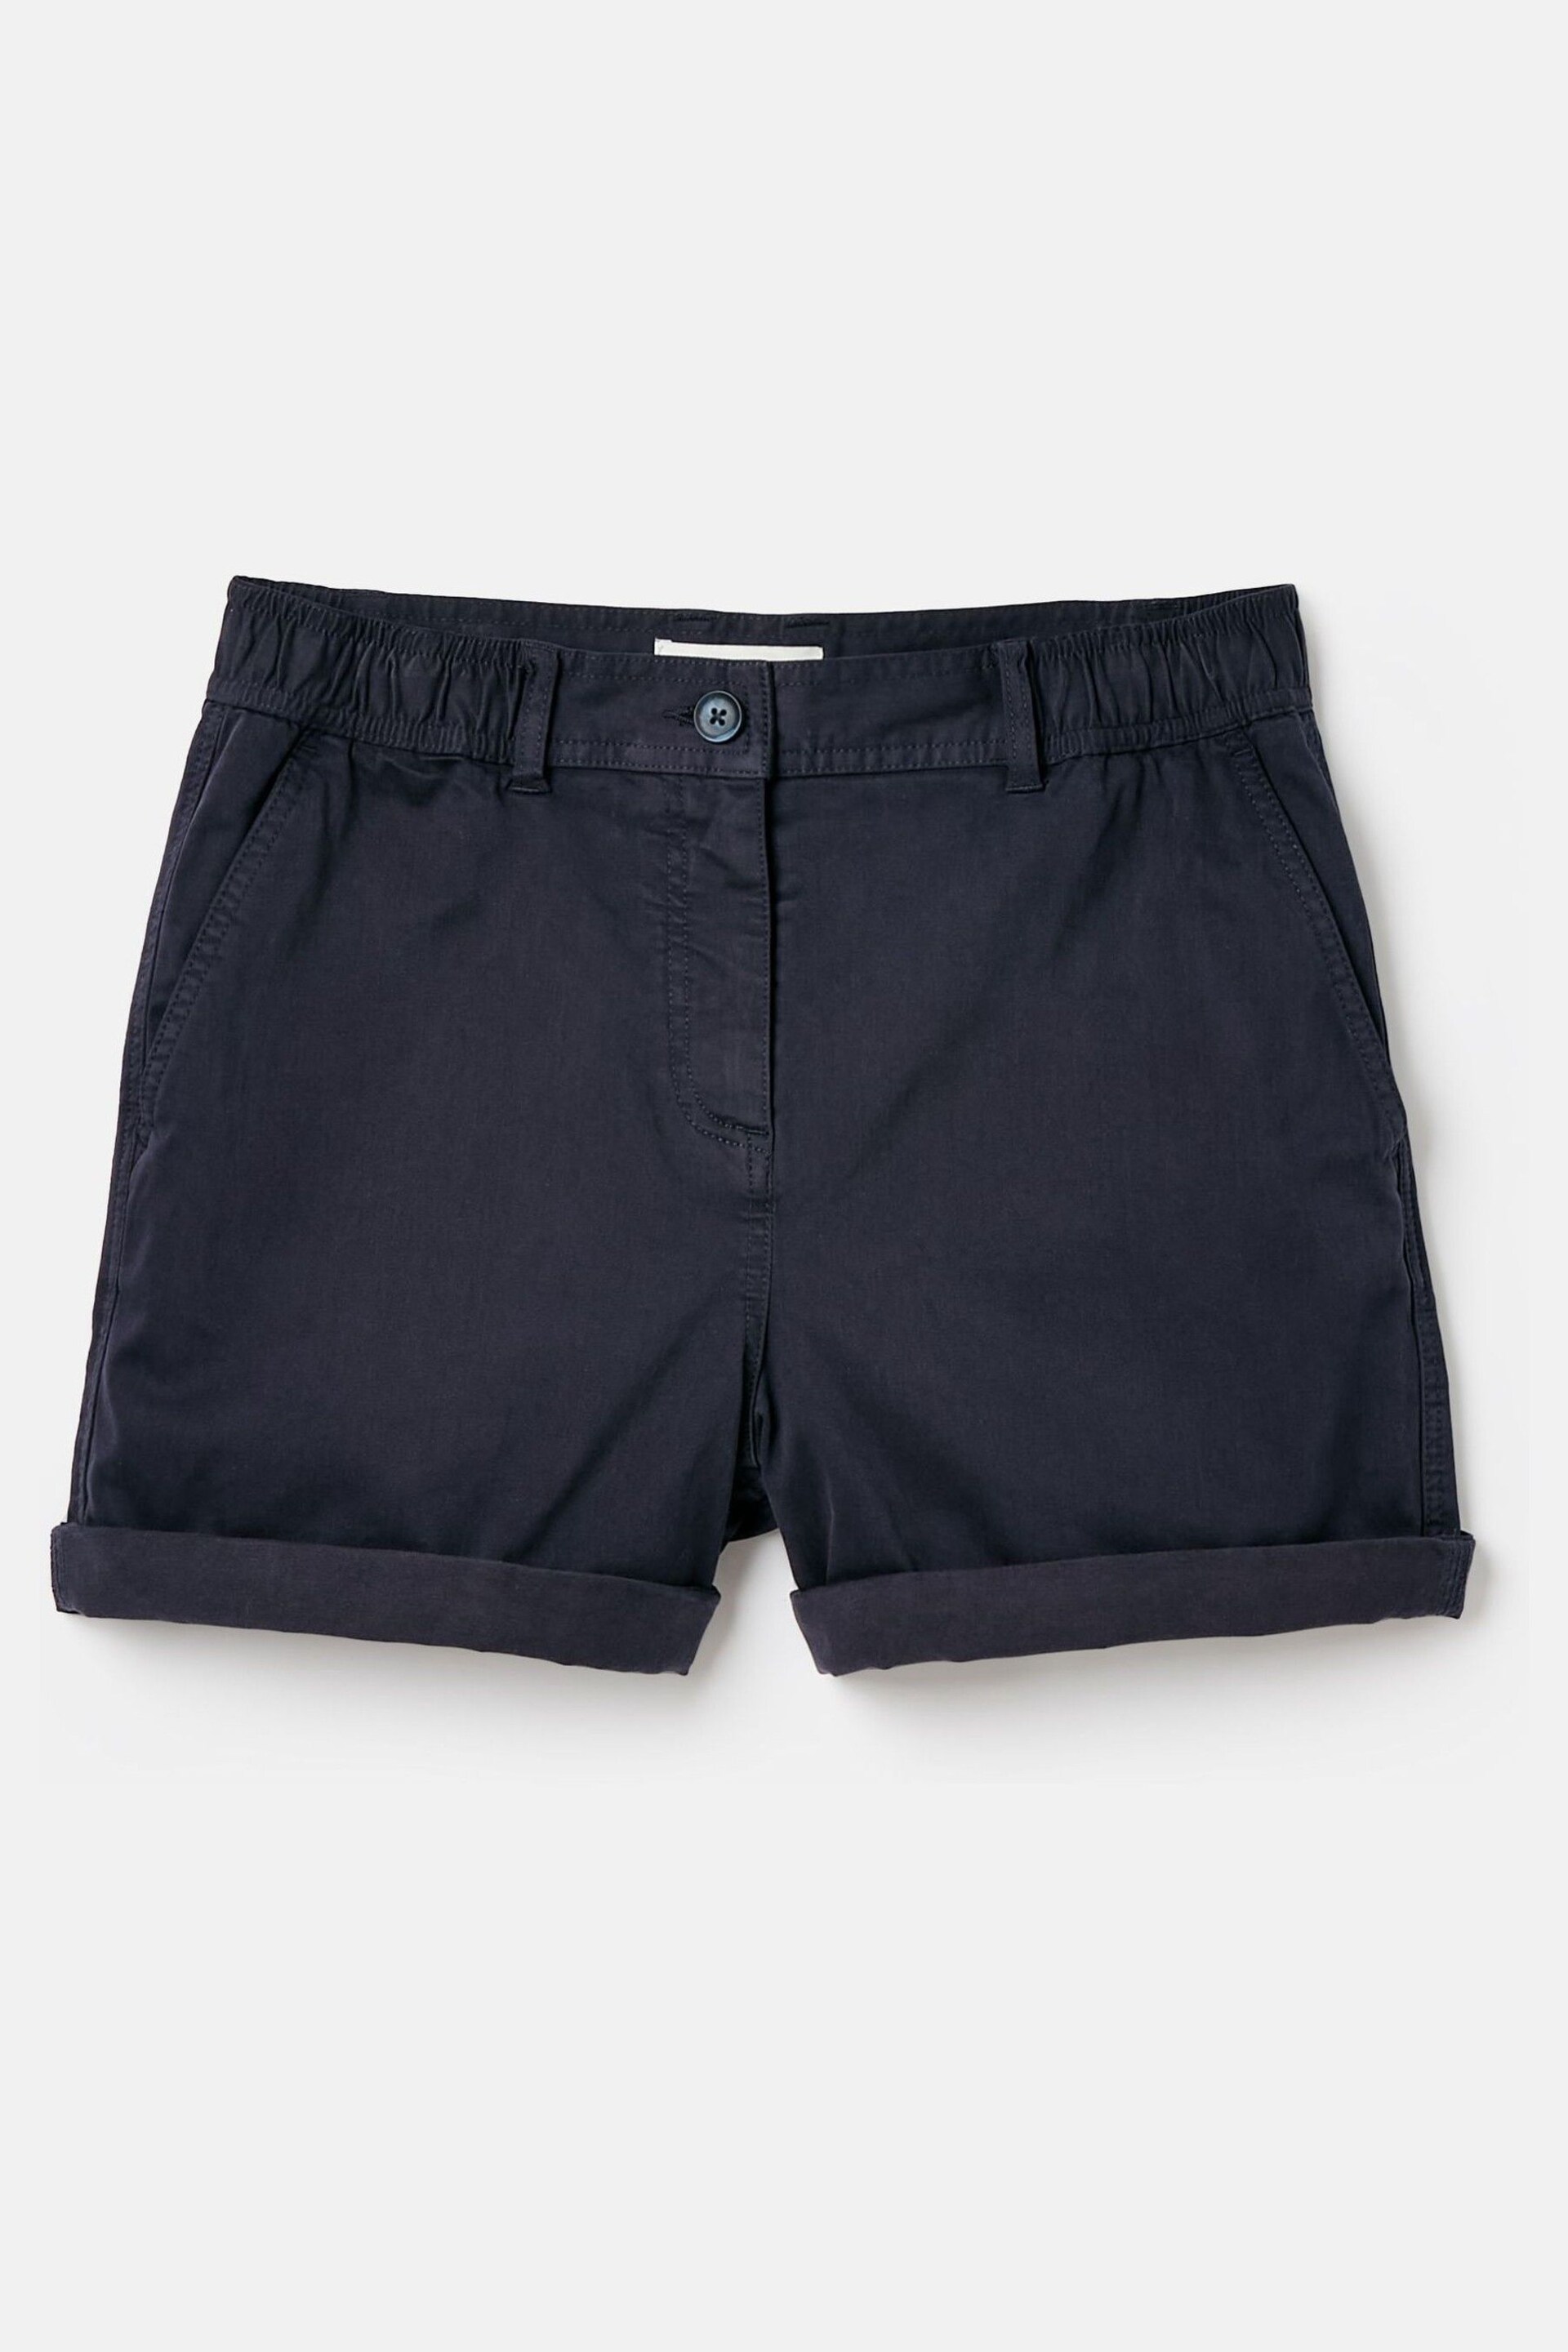 Joules Navy Blue Chino Shorts - Image 5 of 5